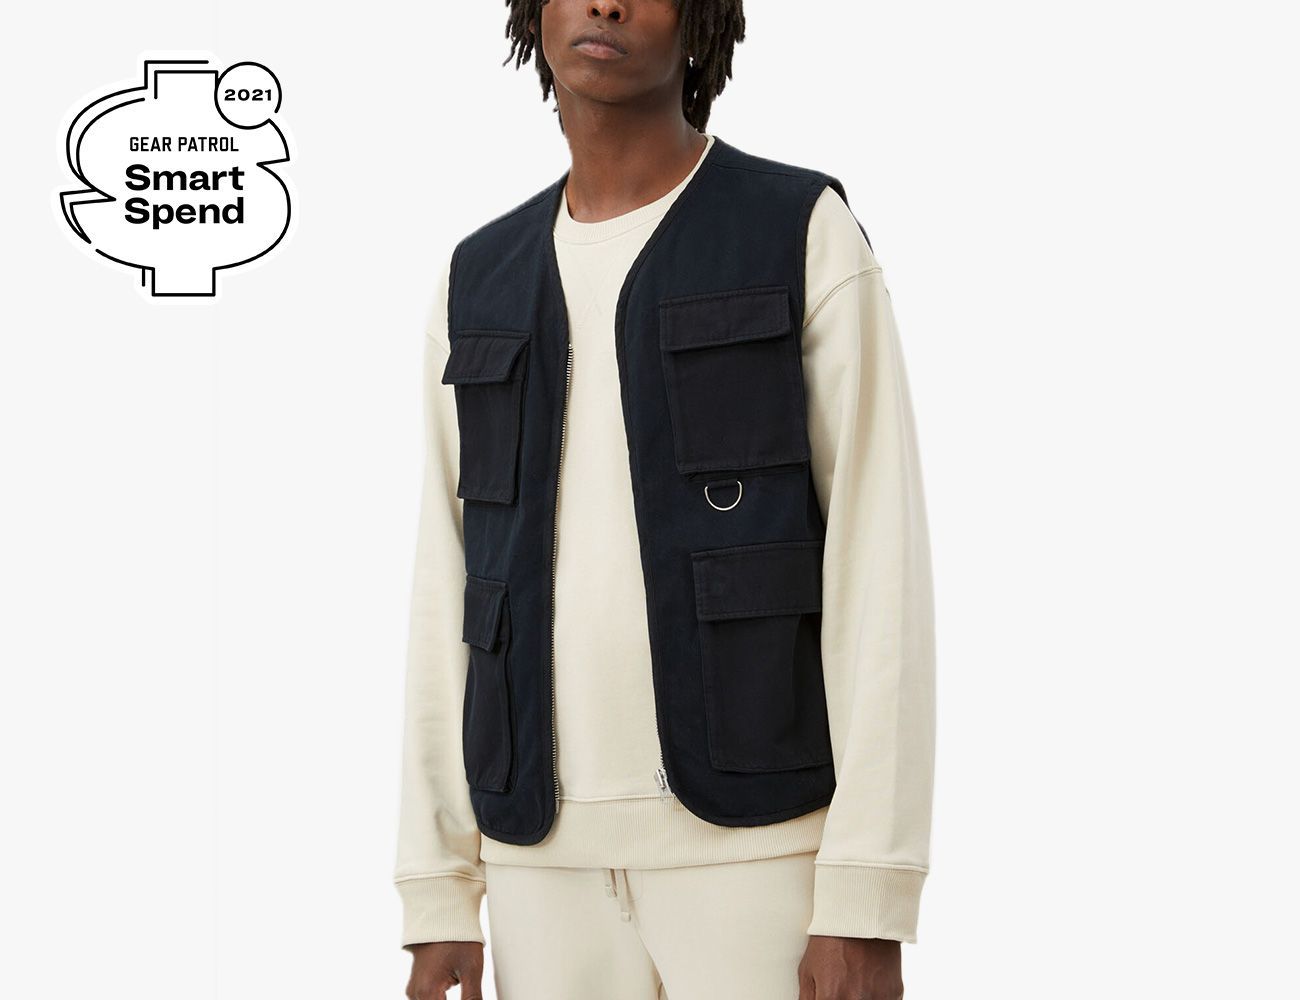 A Utility Vest is the Only Late Summer Layering Piece You Need